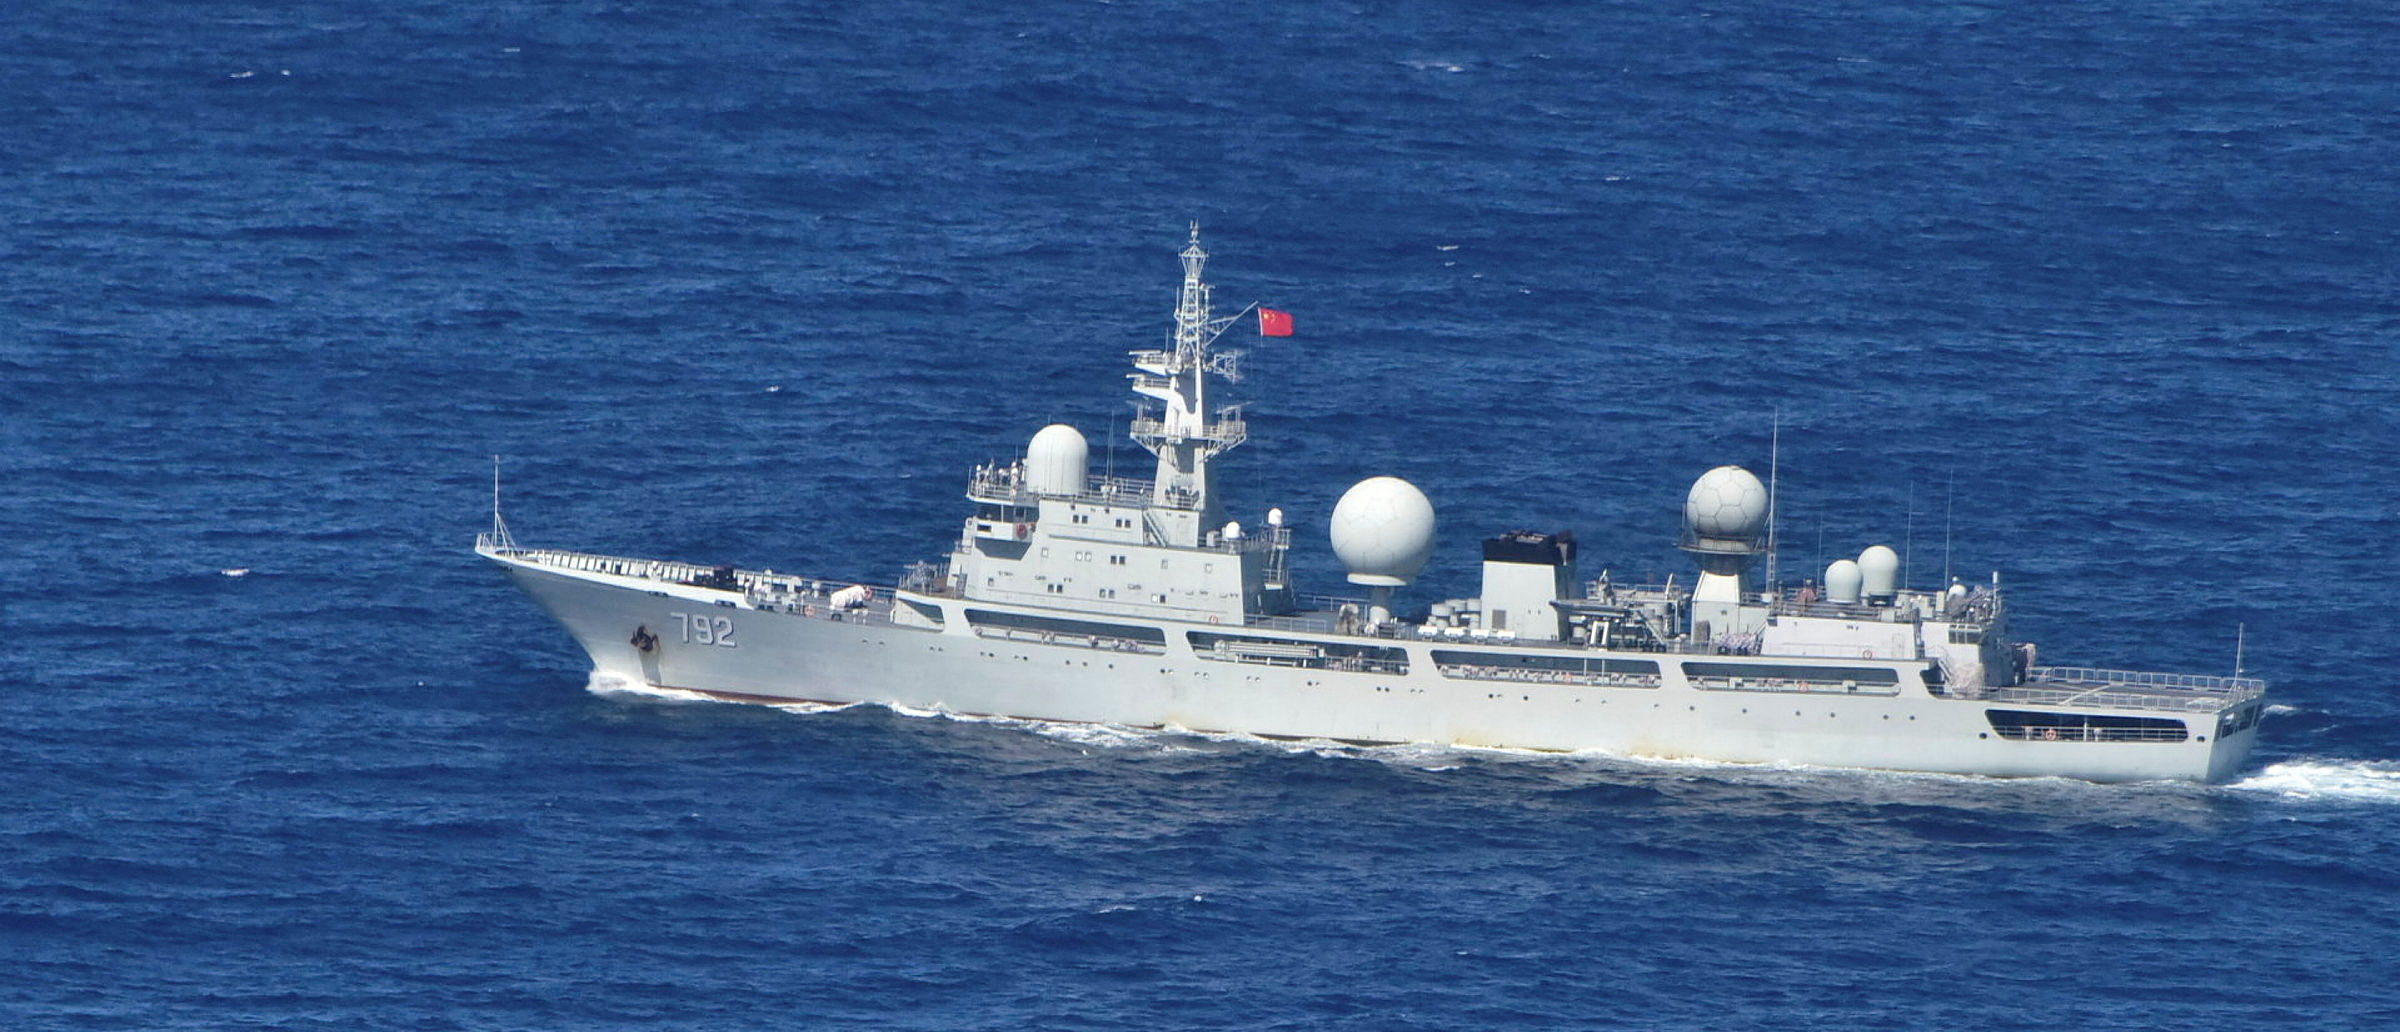 The People's Liberation Army-Navy's (PLA-N) Intelligence Collection Vessel Haiwangxing is pictured operating near the coast of Australia in this handout image released May 13, 2022. (Australian Department of Defense/Handout via REUTERS)